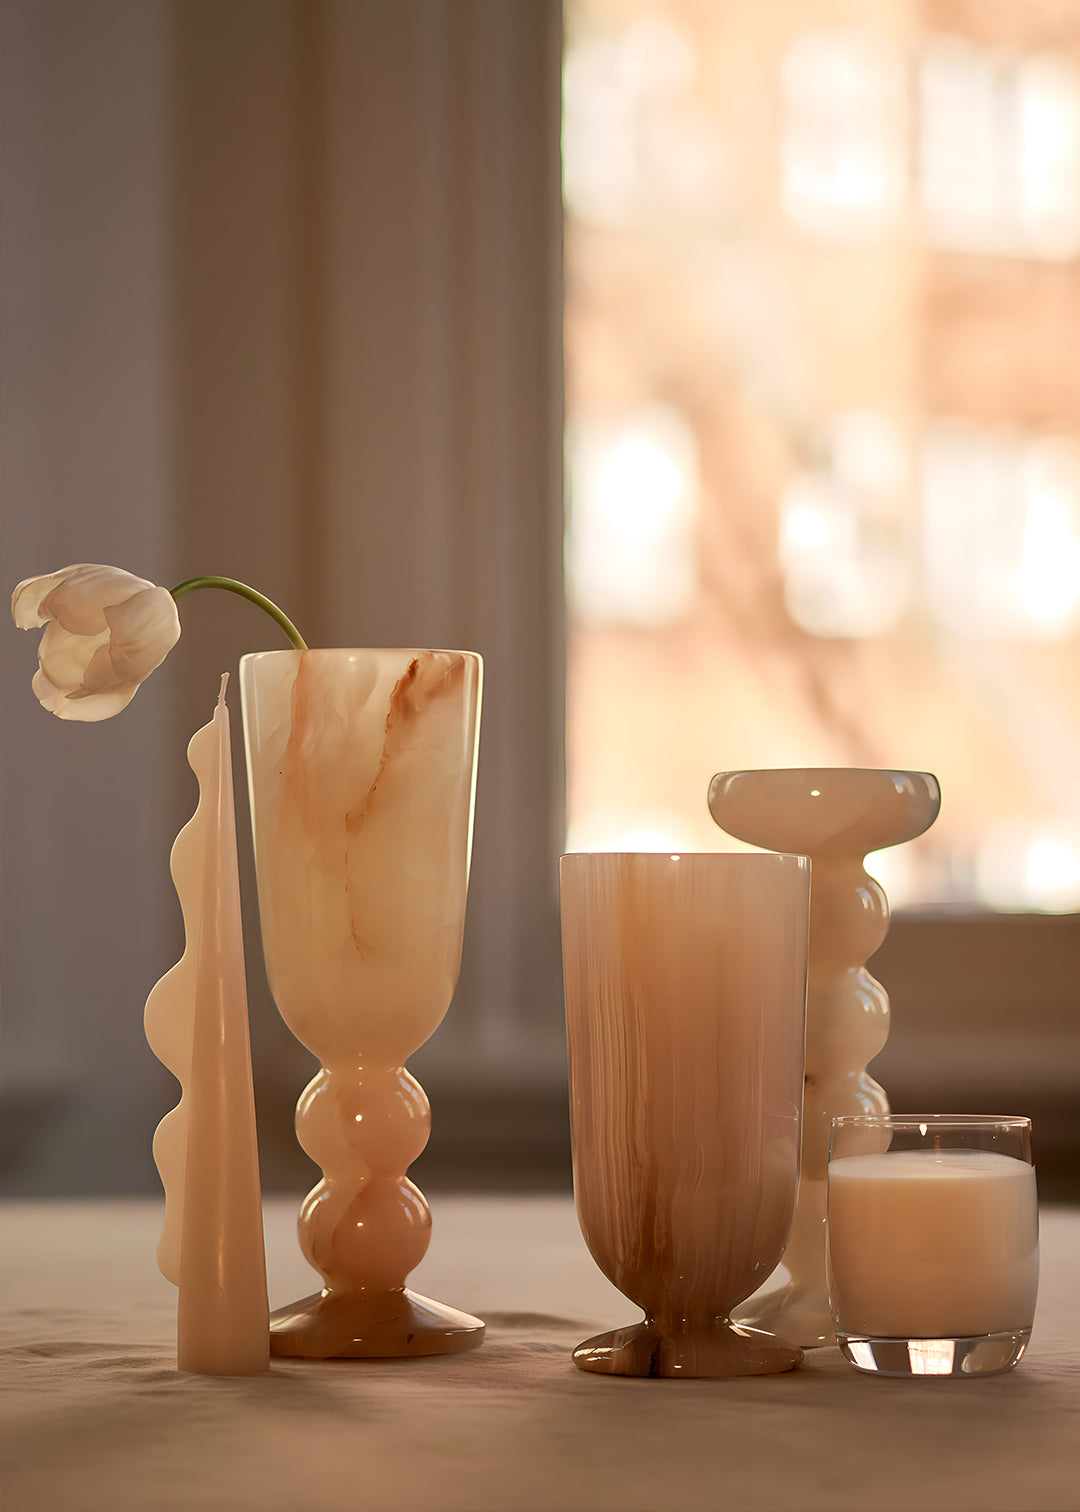 Vases and more